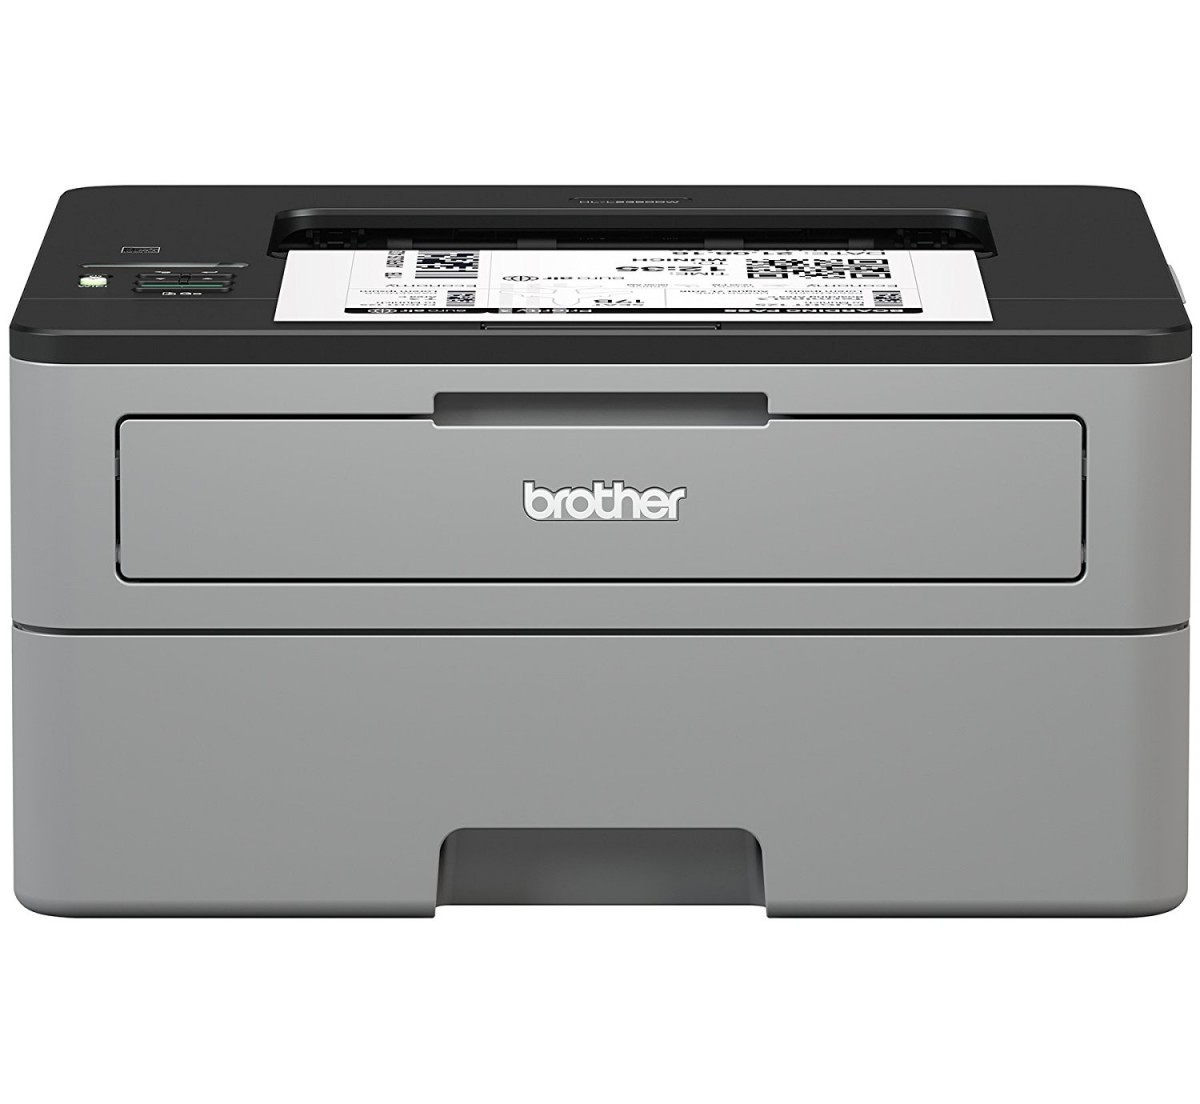 brother hl-l2350dw home printer review